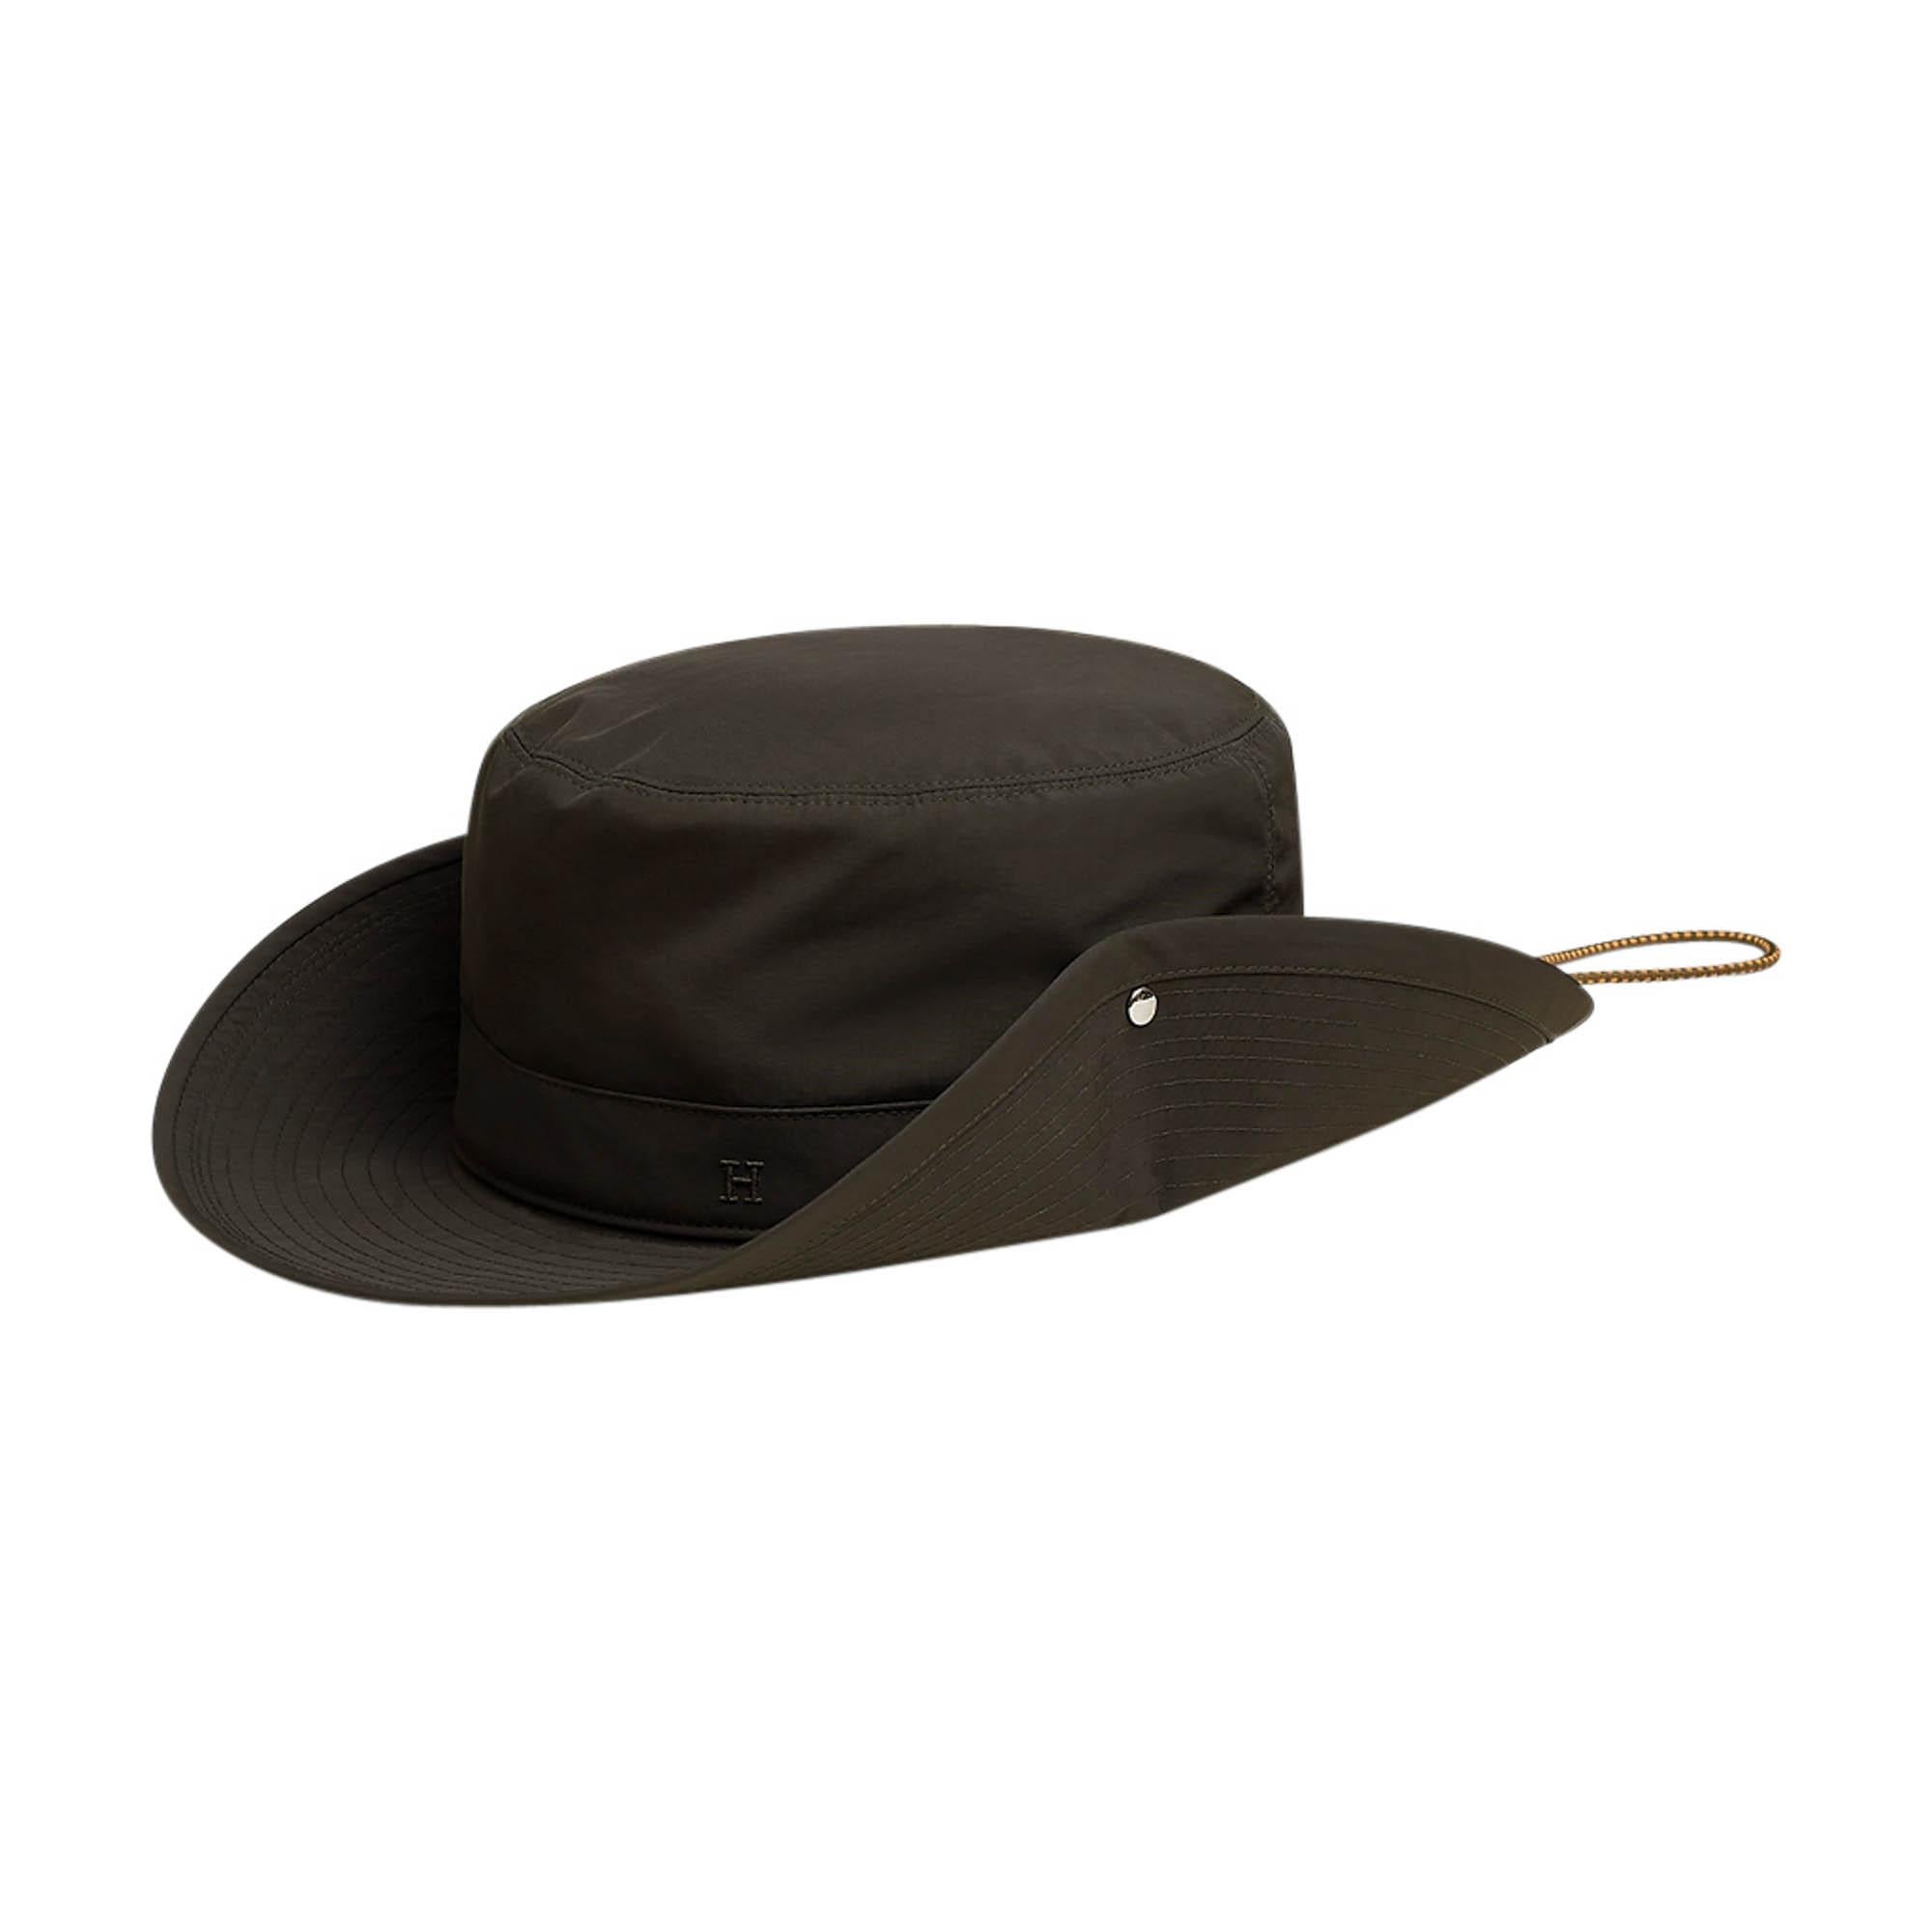 Mightychic offers an Hermes Forest Hat featured in Khaki Fonce plain Canvas.
Tone on tone H Droit embroidered on side.
Hat has brushed palladium plated Clou de Selle snaps on the sides to lift the 3